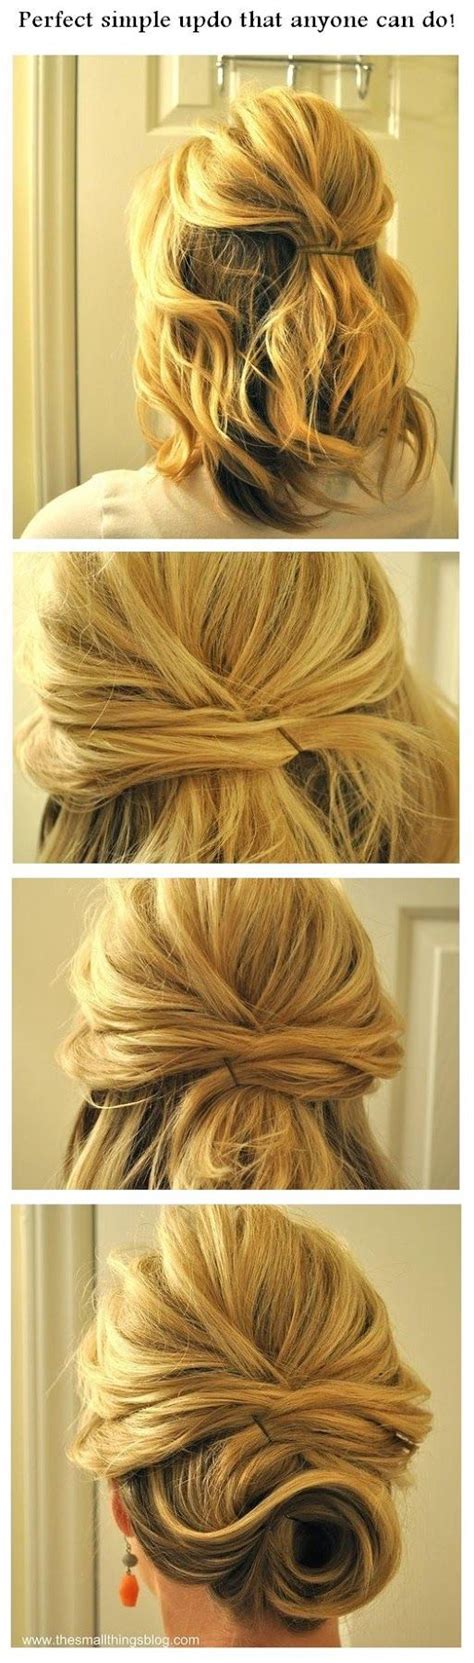 Diy chic braided bun hair tutorial easy updos for long hair 40 stylish updos for medium hair38 pinit easy to do updos for short hair photo 1. 10+ images about Do It Yourself Updos on Pinterest | Updo, Elegant updo and My hair